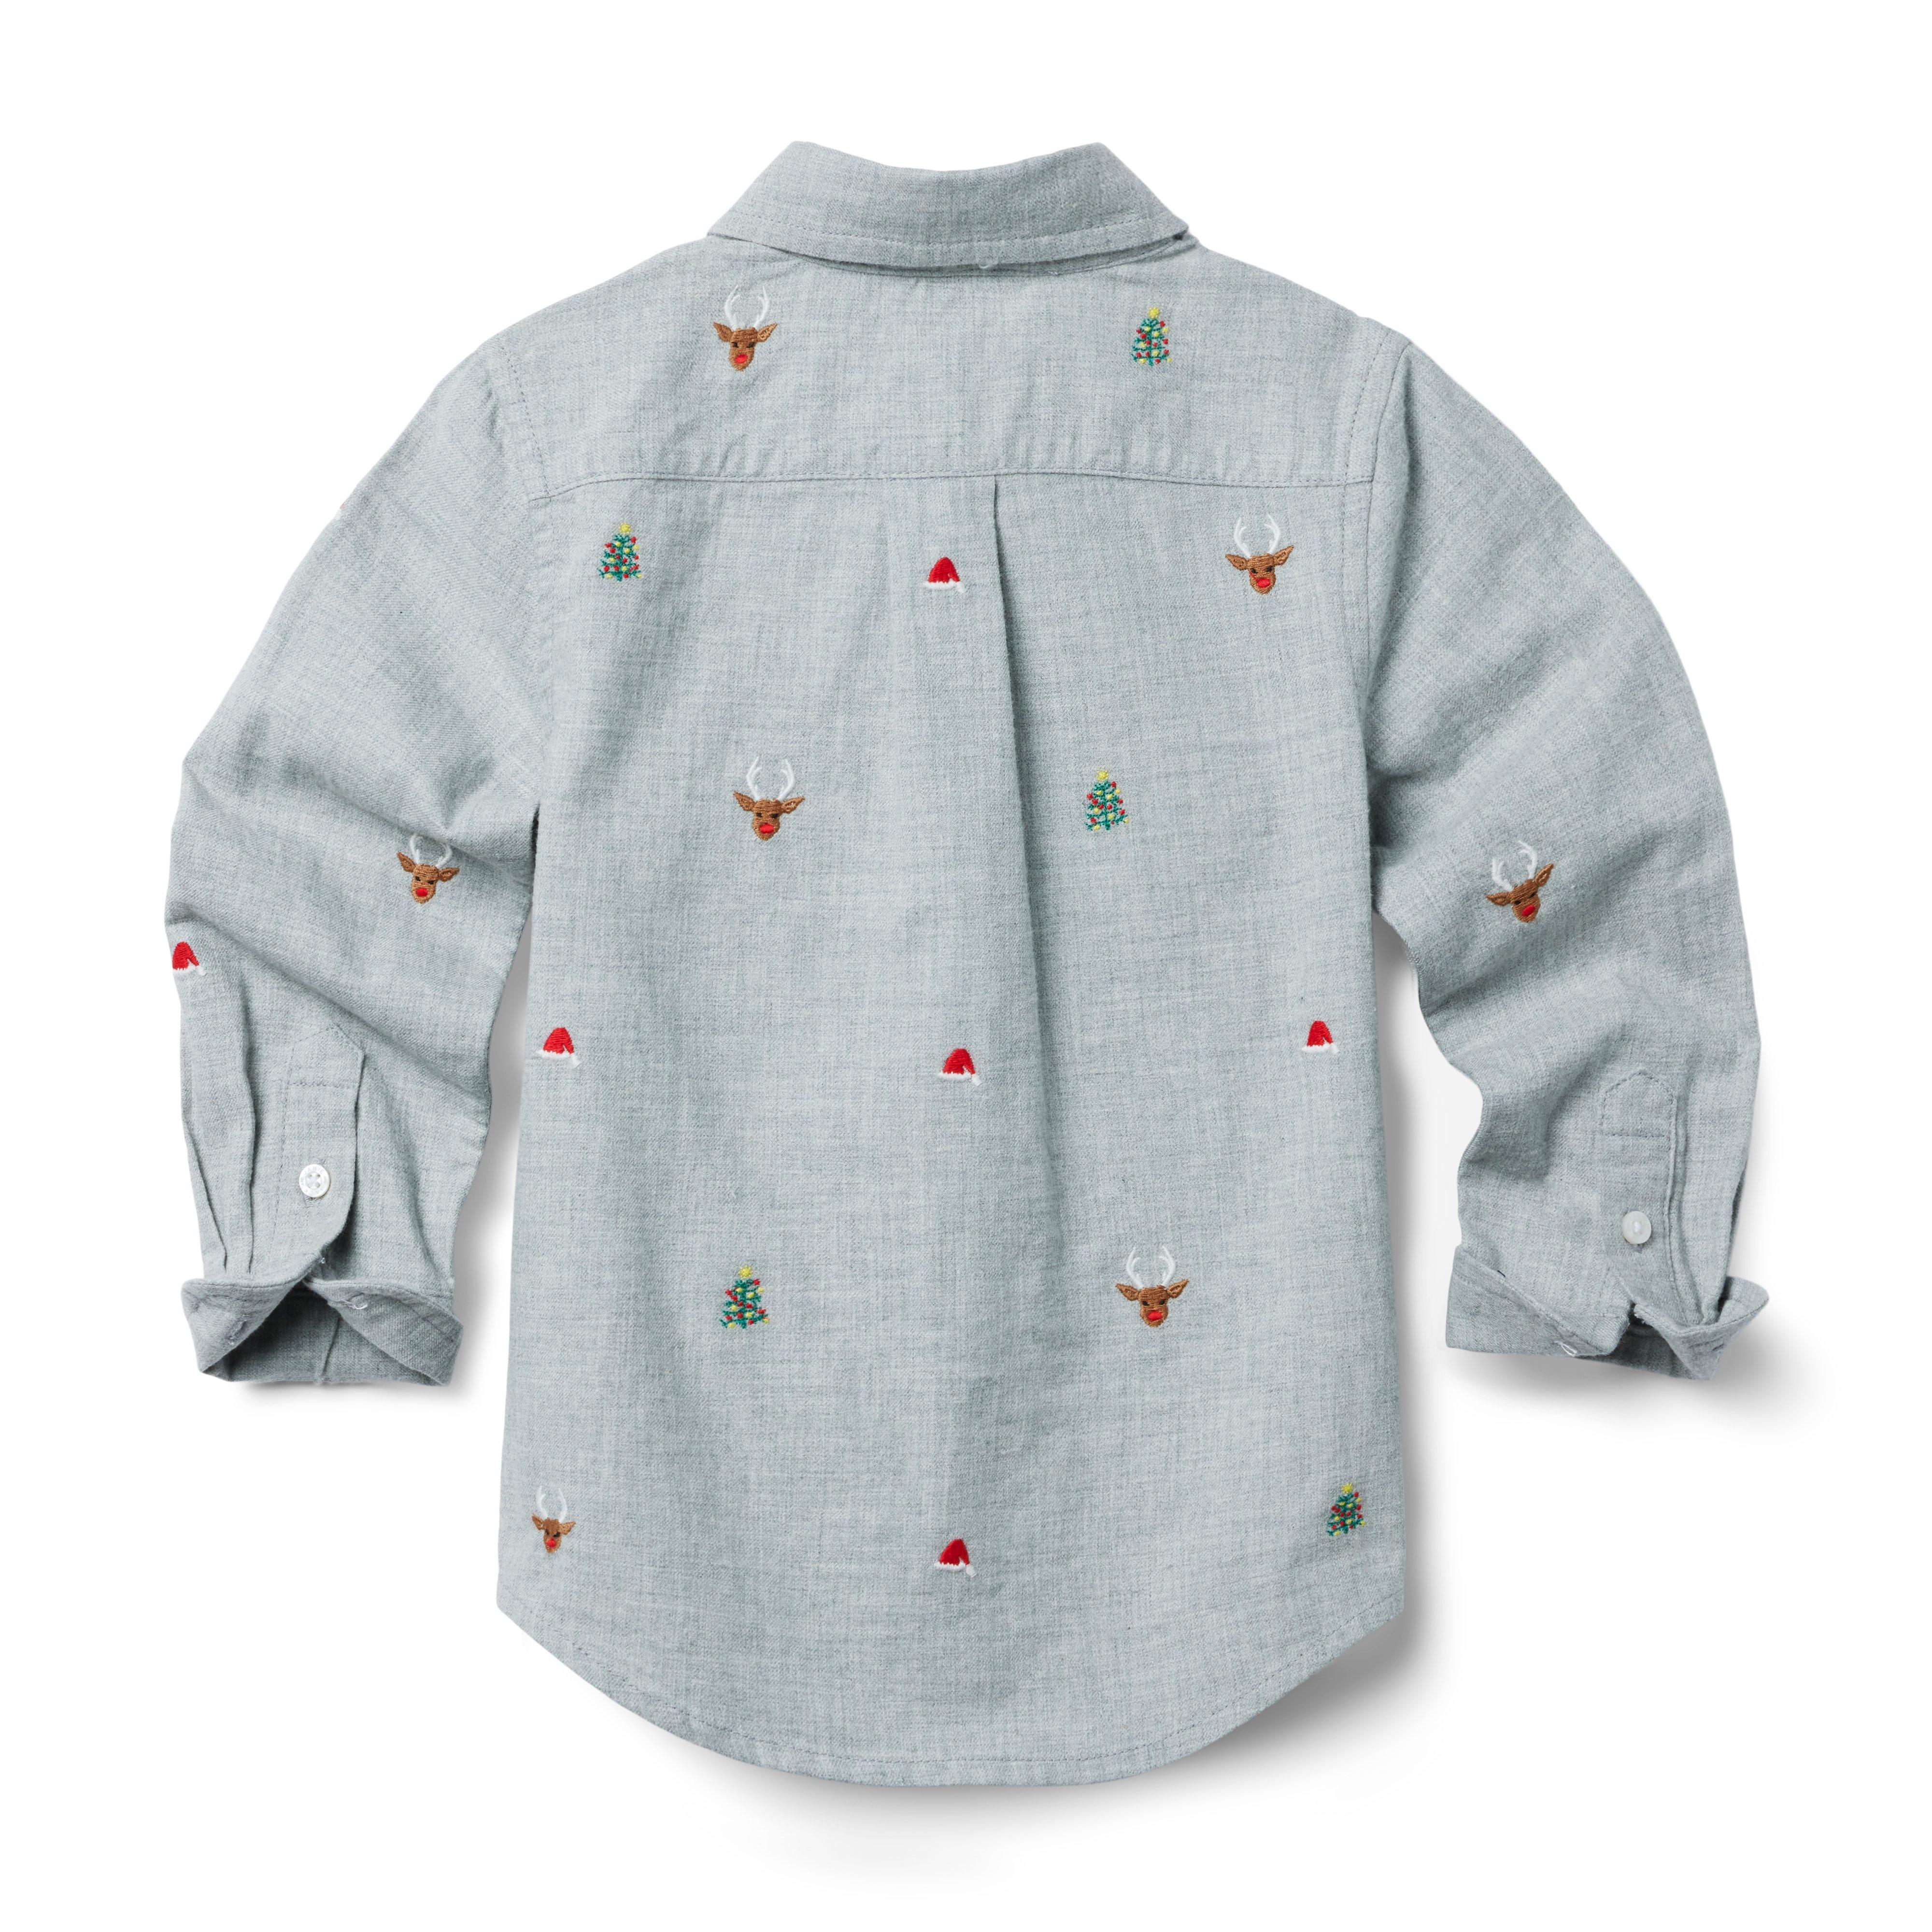 Boy Classic Grey Heather Embroidered Flannel Shirt by Janie and Jack